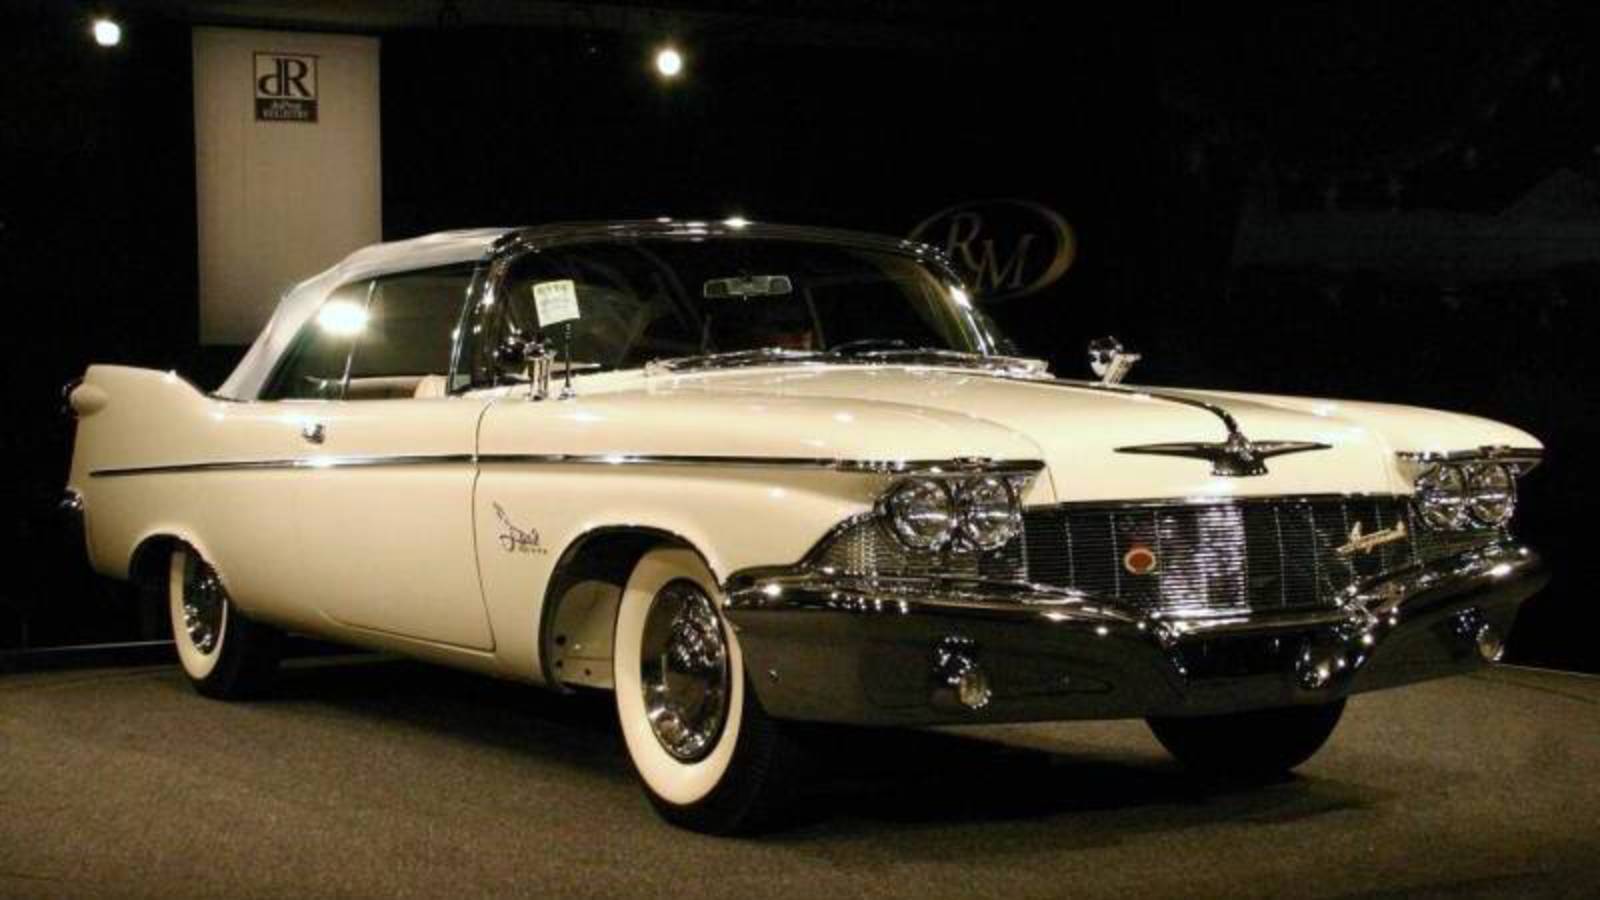 1960 Chrysler Imperial Crown Convertible Coupe